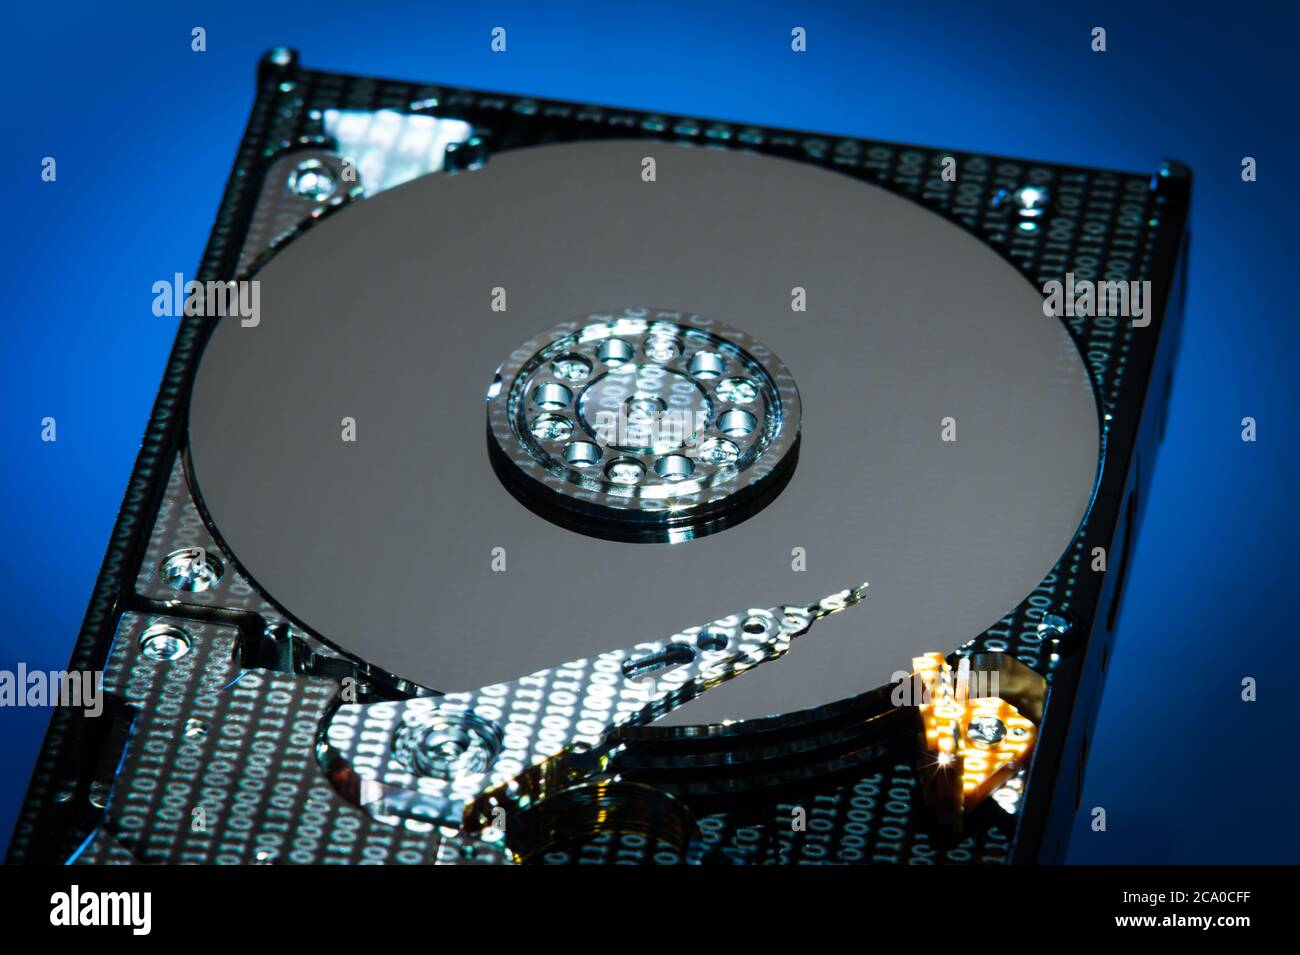 A hard disk drive (HDD) with data projected on it. Stock Photo